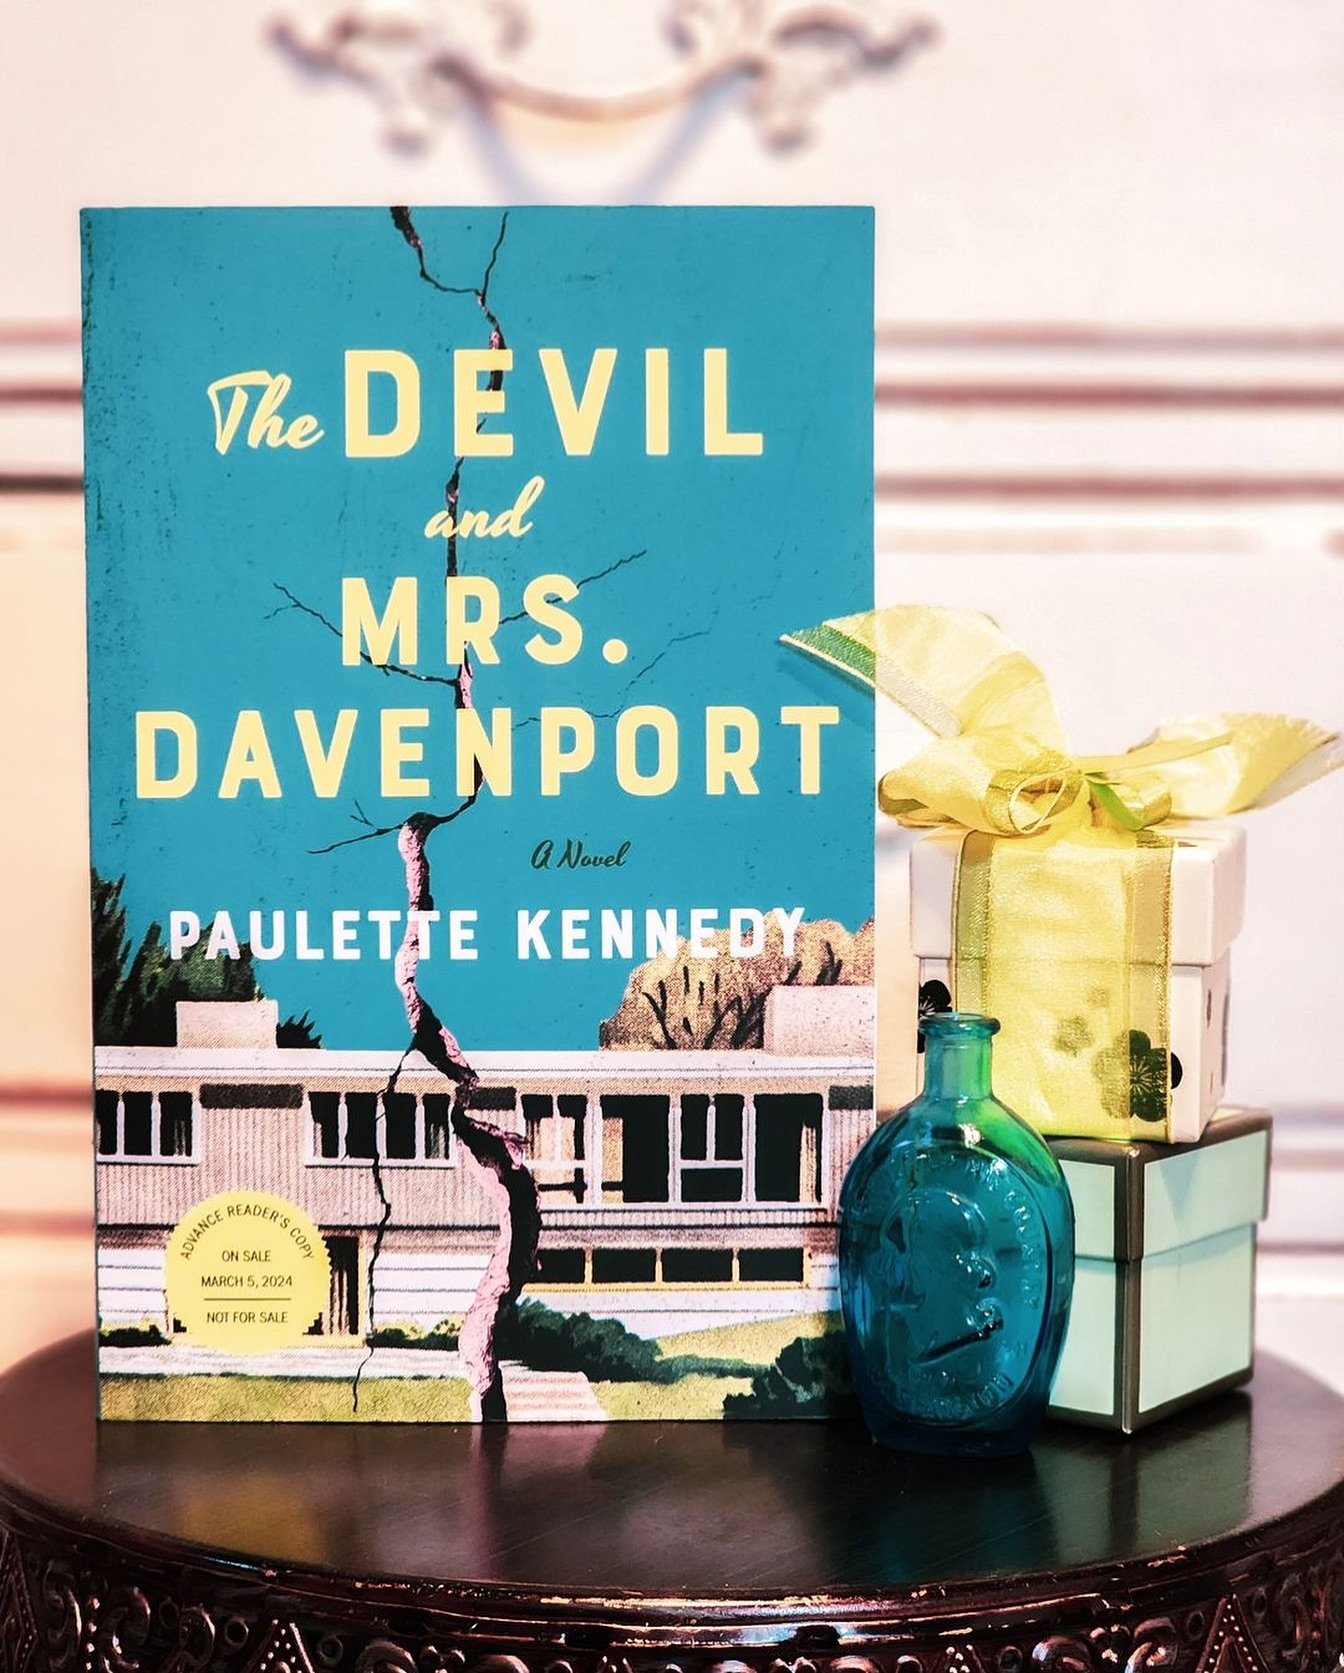 🖤 Repost from @booksloveandunderstanding 
✍️ Book Tour / Book Review ✍️ 
Devil and Mrs.Davenport by Paulette Kennedy 
.
*Thank you to #partner @suzyapprovedbooktours @amazonpublishing and author @pkennedywrites for my #gifted copy and for having me 